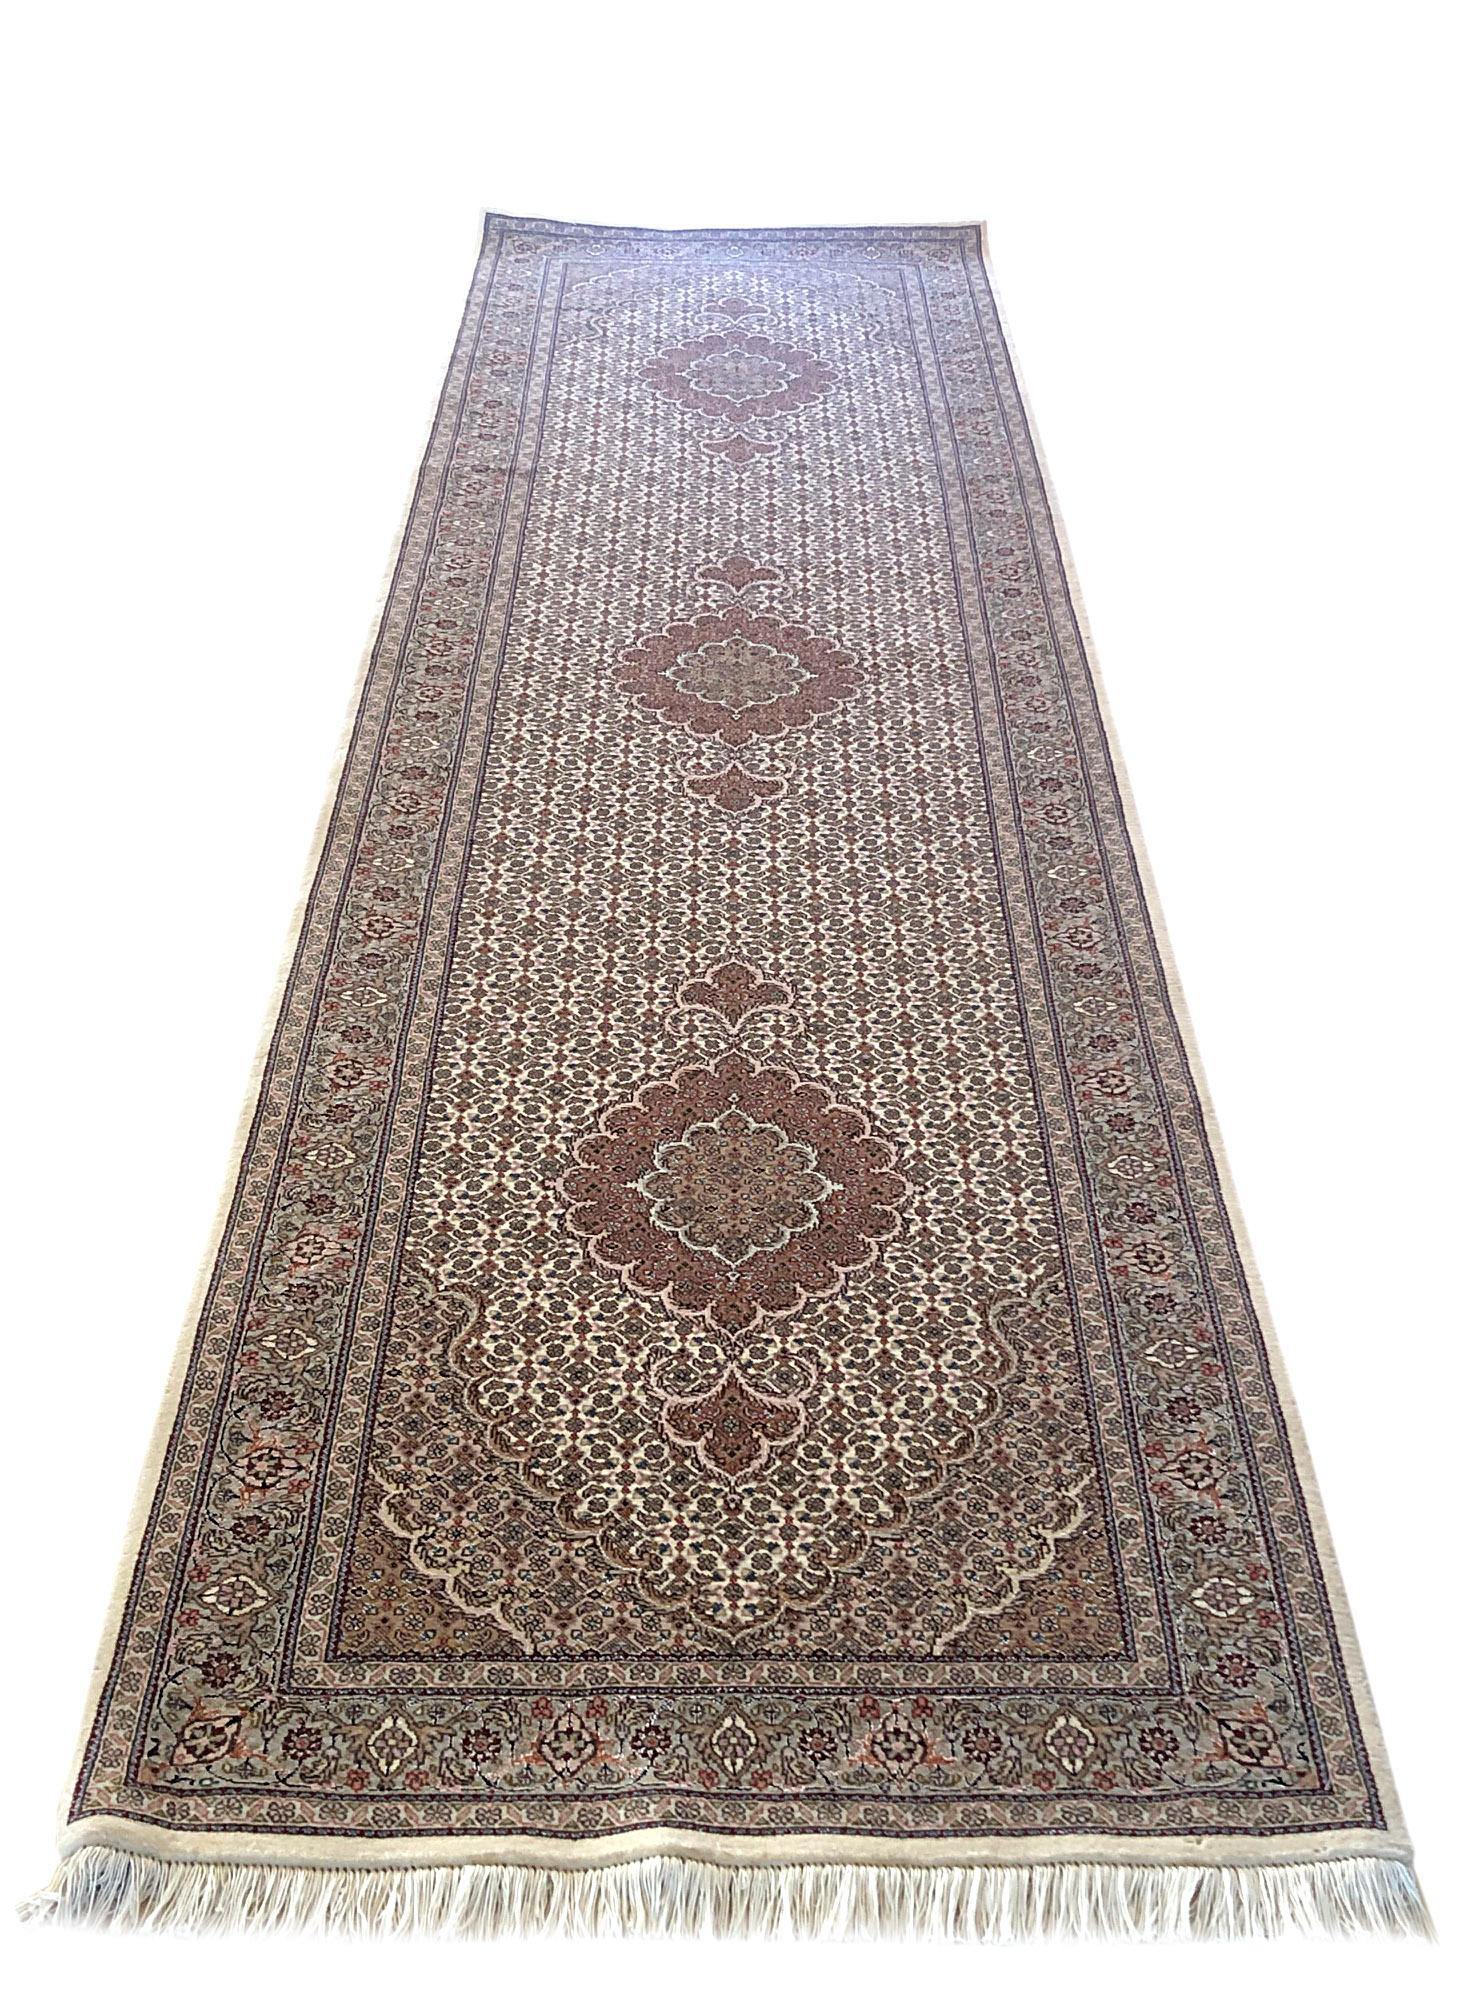 Tabriz rugs are well known for their excellent weaving and design. One of the very famous patterns of Tabriz rugs are Fish Design known as Mahi and is one of the classis patterns produced by the masterful carpet in Tabriz. This beautiful piece has